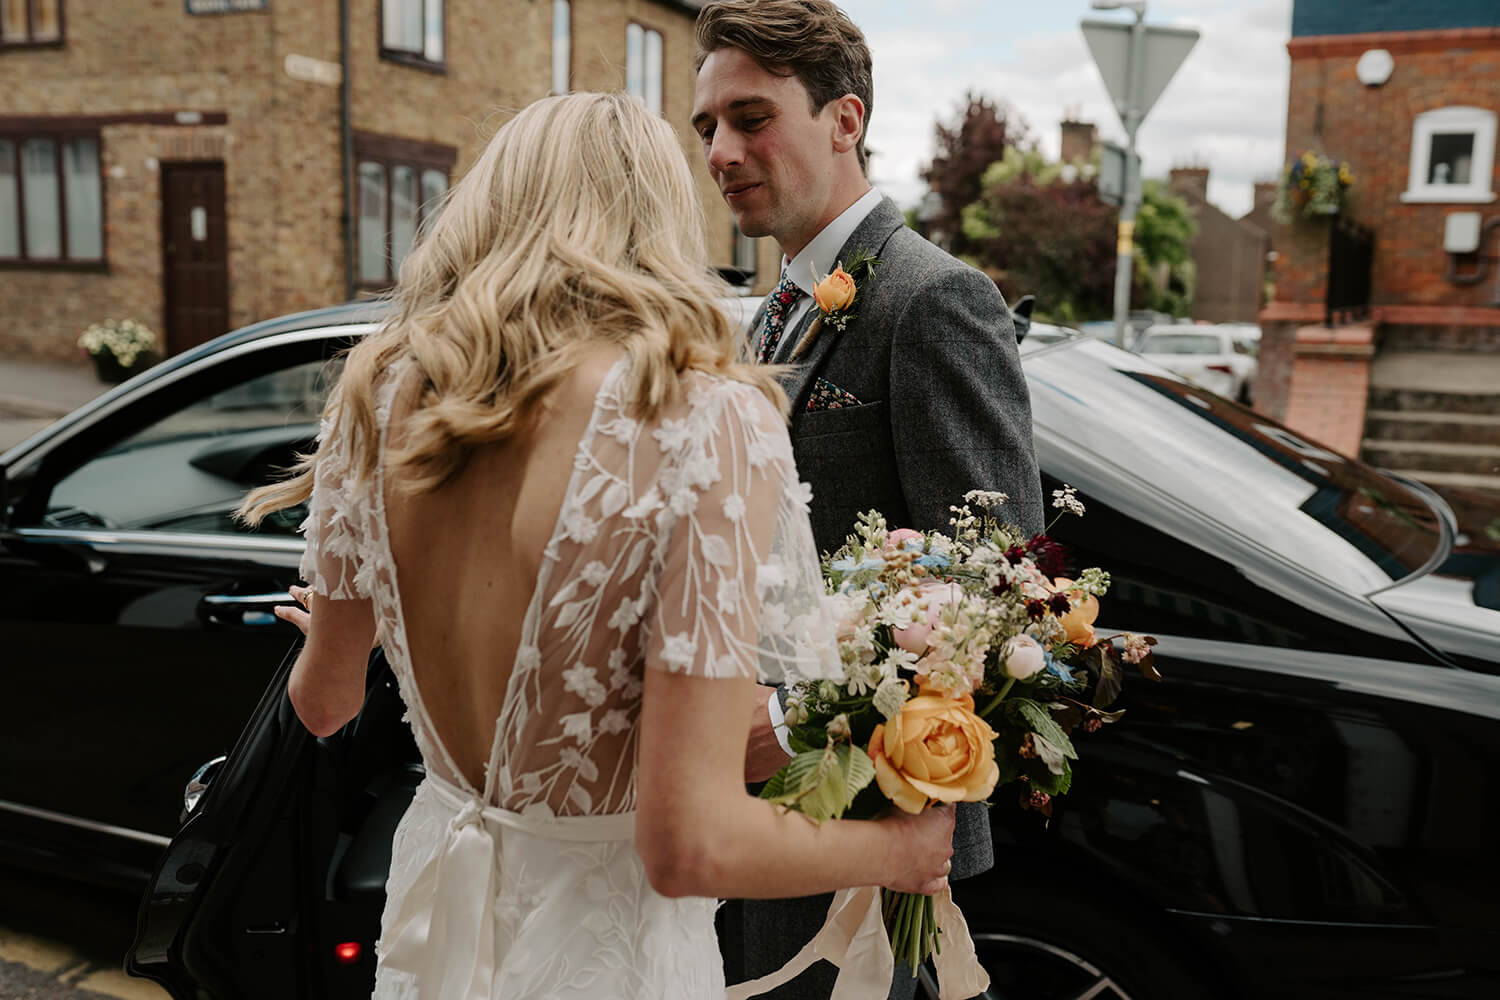 Luci's bespoke wedding dress from Constellation Ame